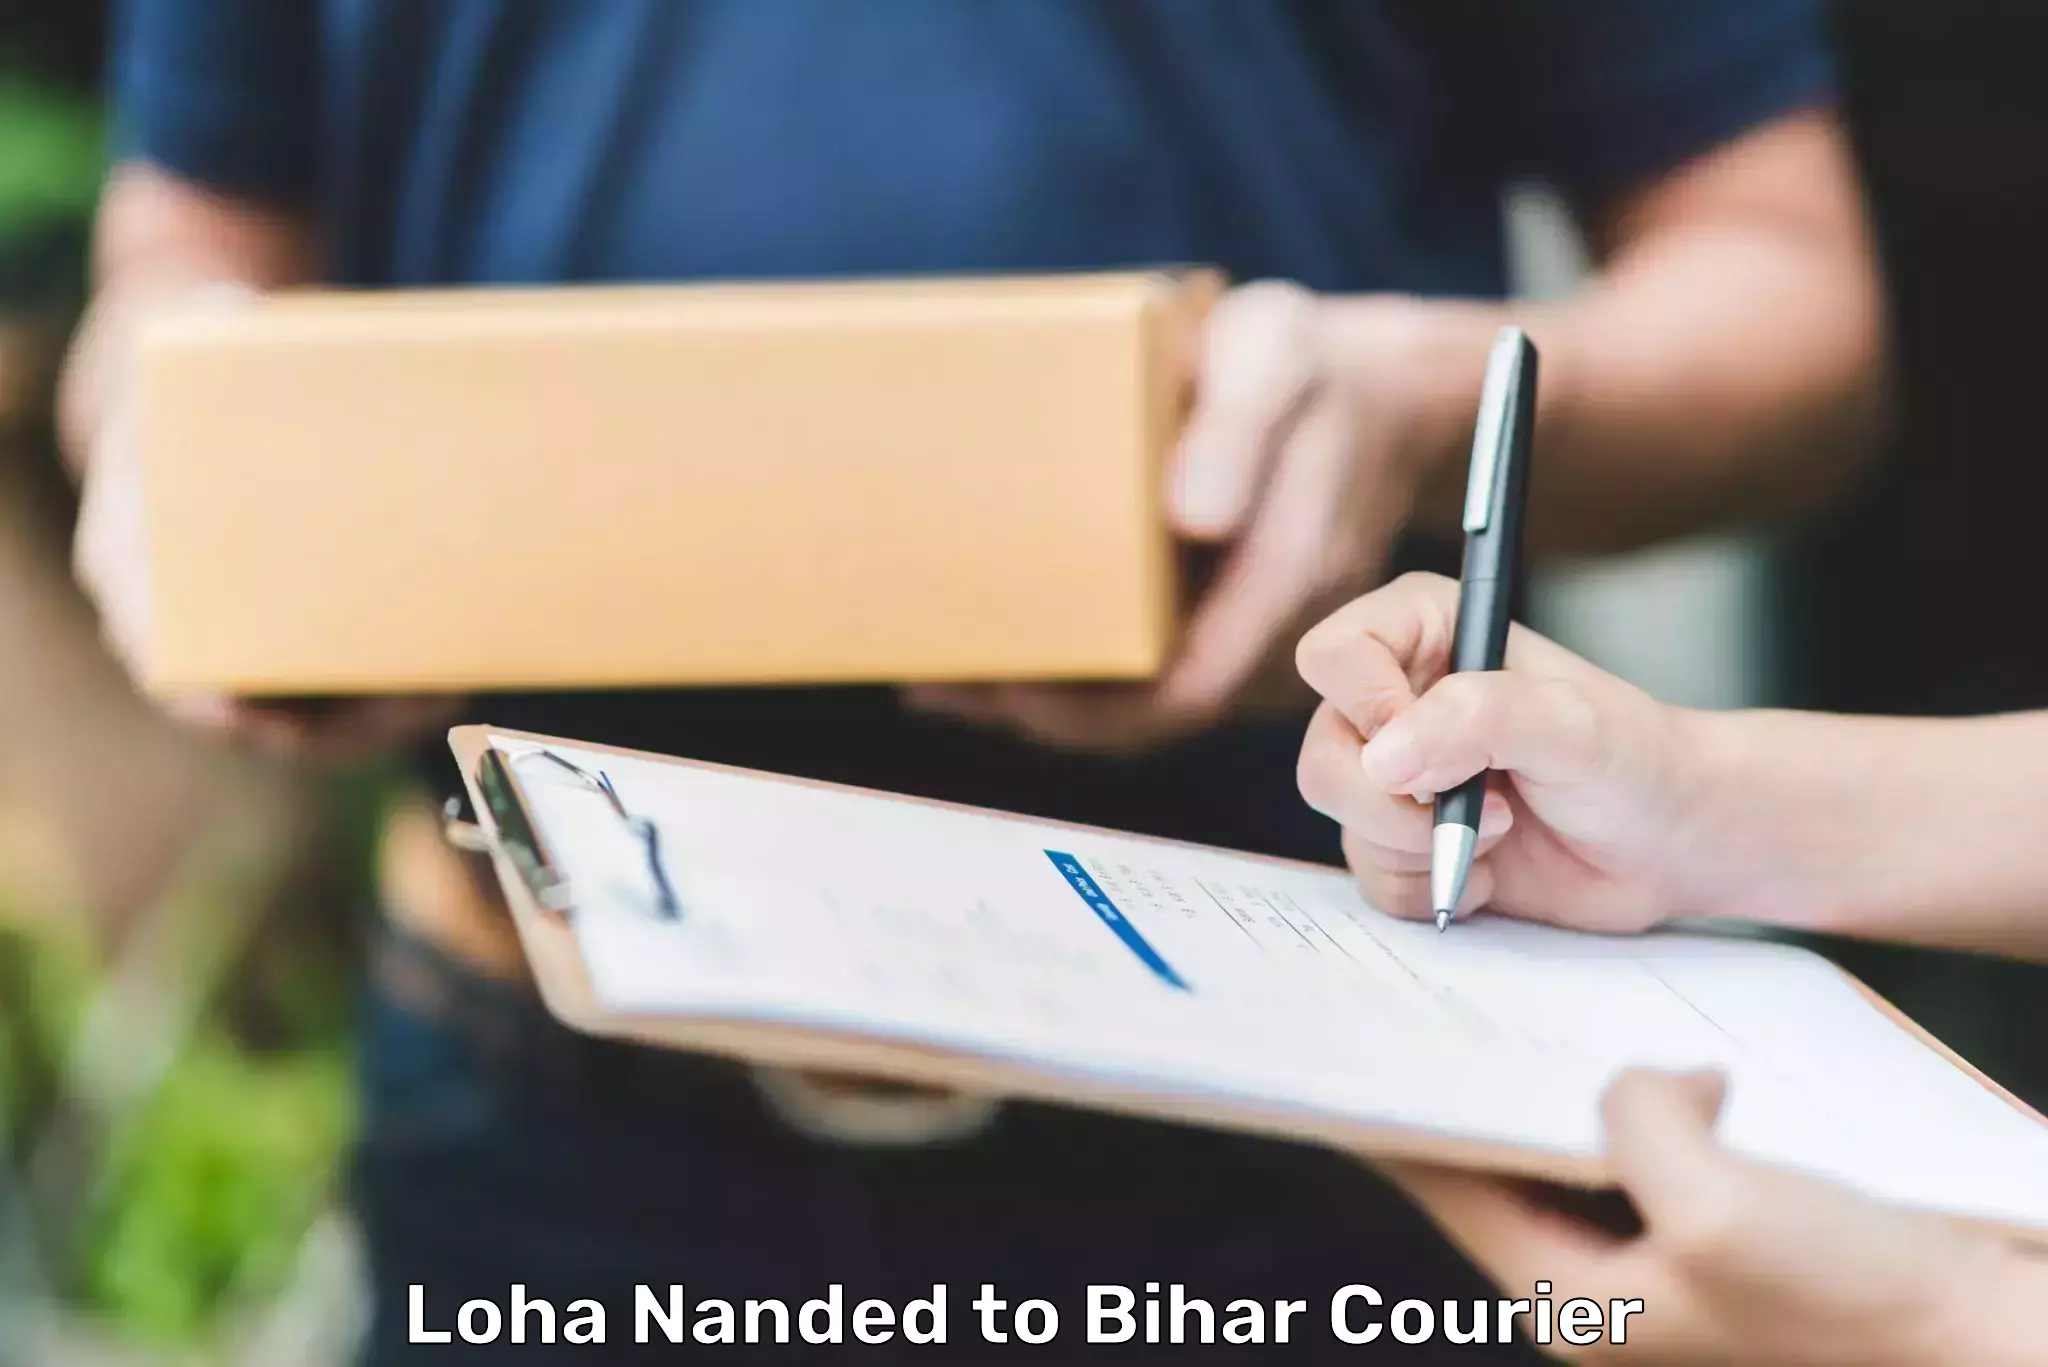 Enhanced tracking features Loha Nanded to Bihar